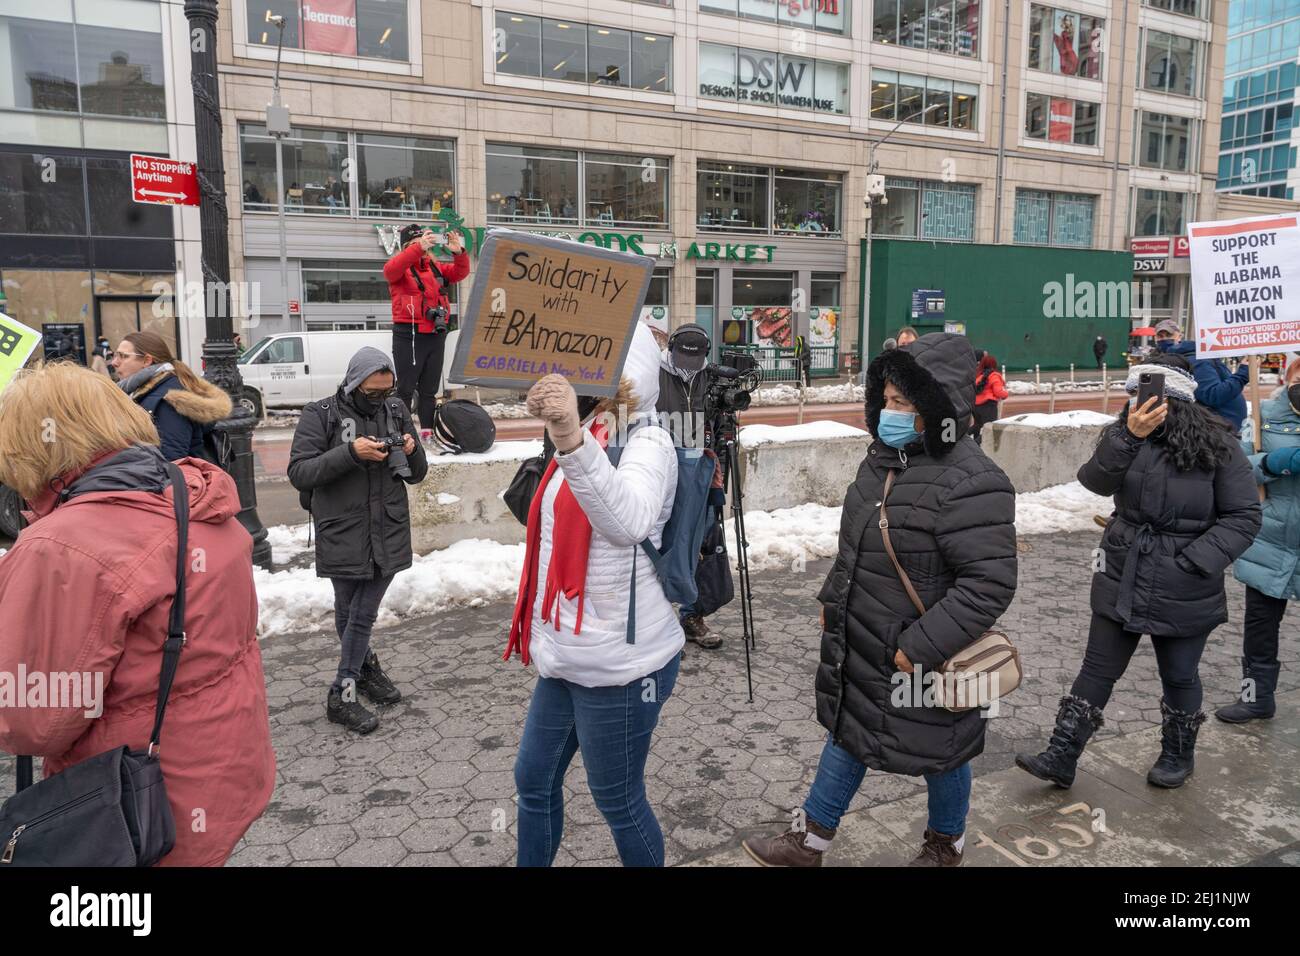 New York, USA. 20th Feb, 2021. Protestors holding signs picket across from Amazon's Union Square Whole Foods Market in support of Alabama Amazon Union on February 20, 2021 in New York City. The Southern Workers Assembly organized a National Day of Solidarity on February 20th, for anyone supporting workers' rights. Activists in New York City came out to show their support on Saturday for the approximately 6,000 Amazon warehouse workers in Bessemer, Alabama, who will vote by mail on whether to be represented by the Retail, Wholesale Department Store Workers Union (RWDSU). Credit: Ron Adar/Alamy  Stock Photo